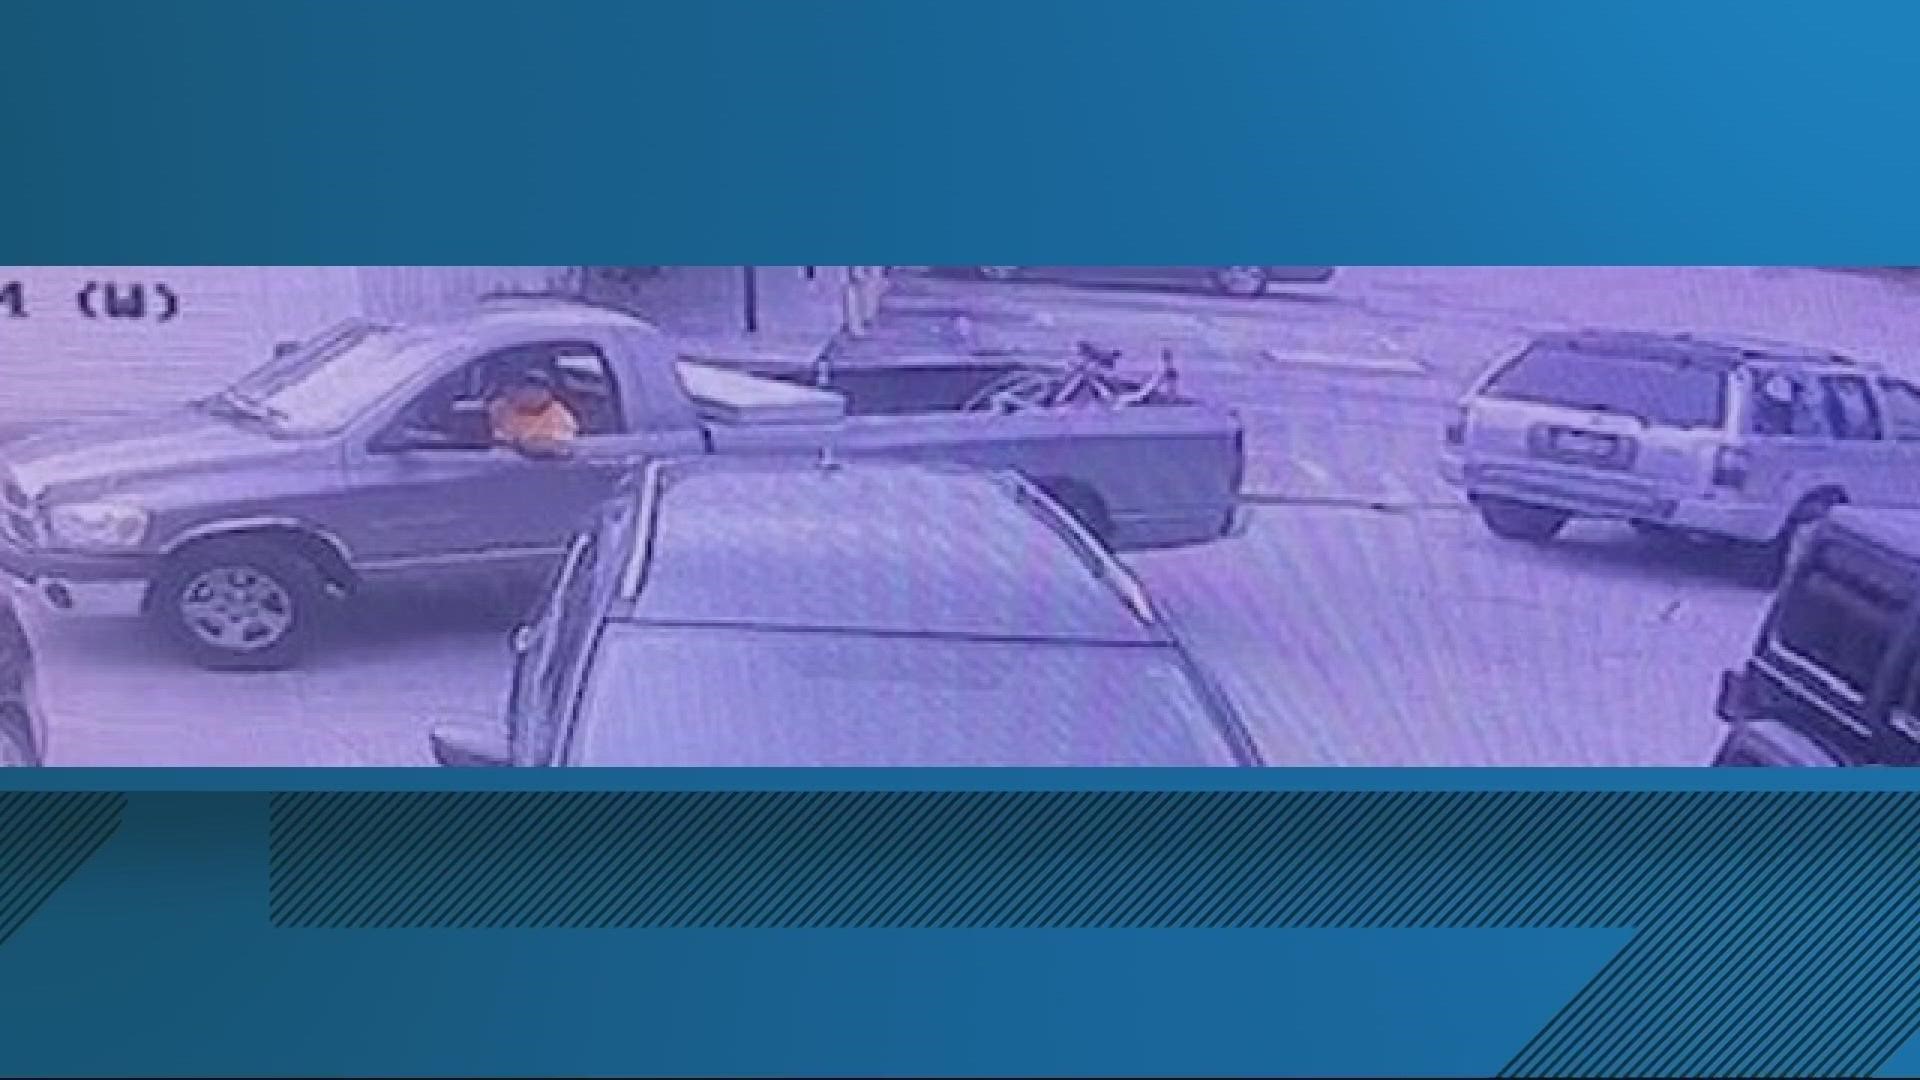 The Jacksonville Sheriff's Office is asking for help finding the vehicle in these photos. An older model Ram pick-up truck was seen towing a 1999 Infiniti QX SUV.